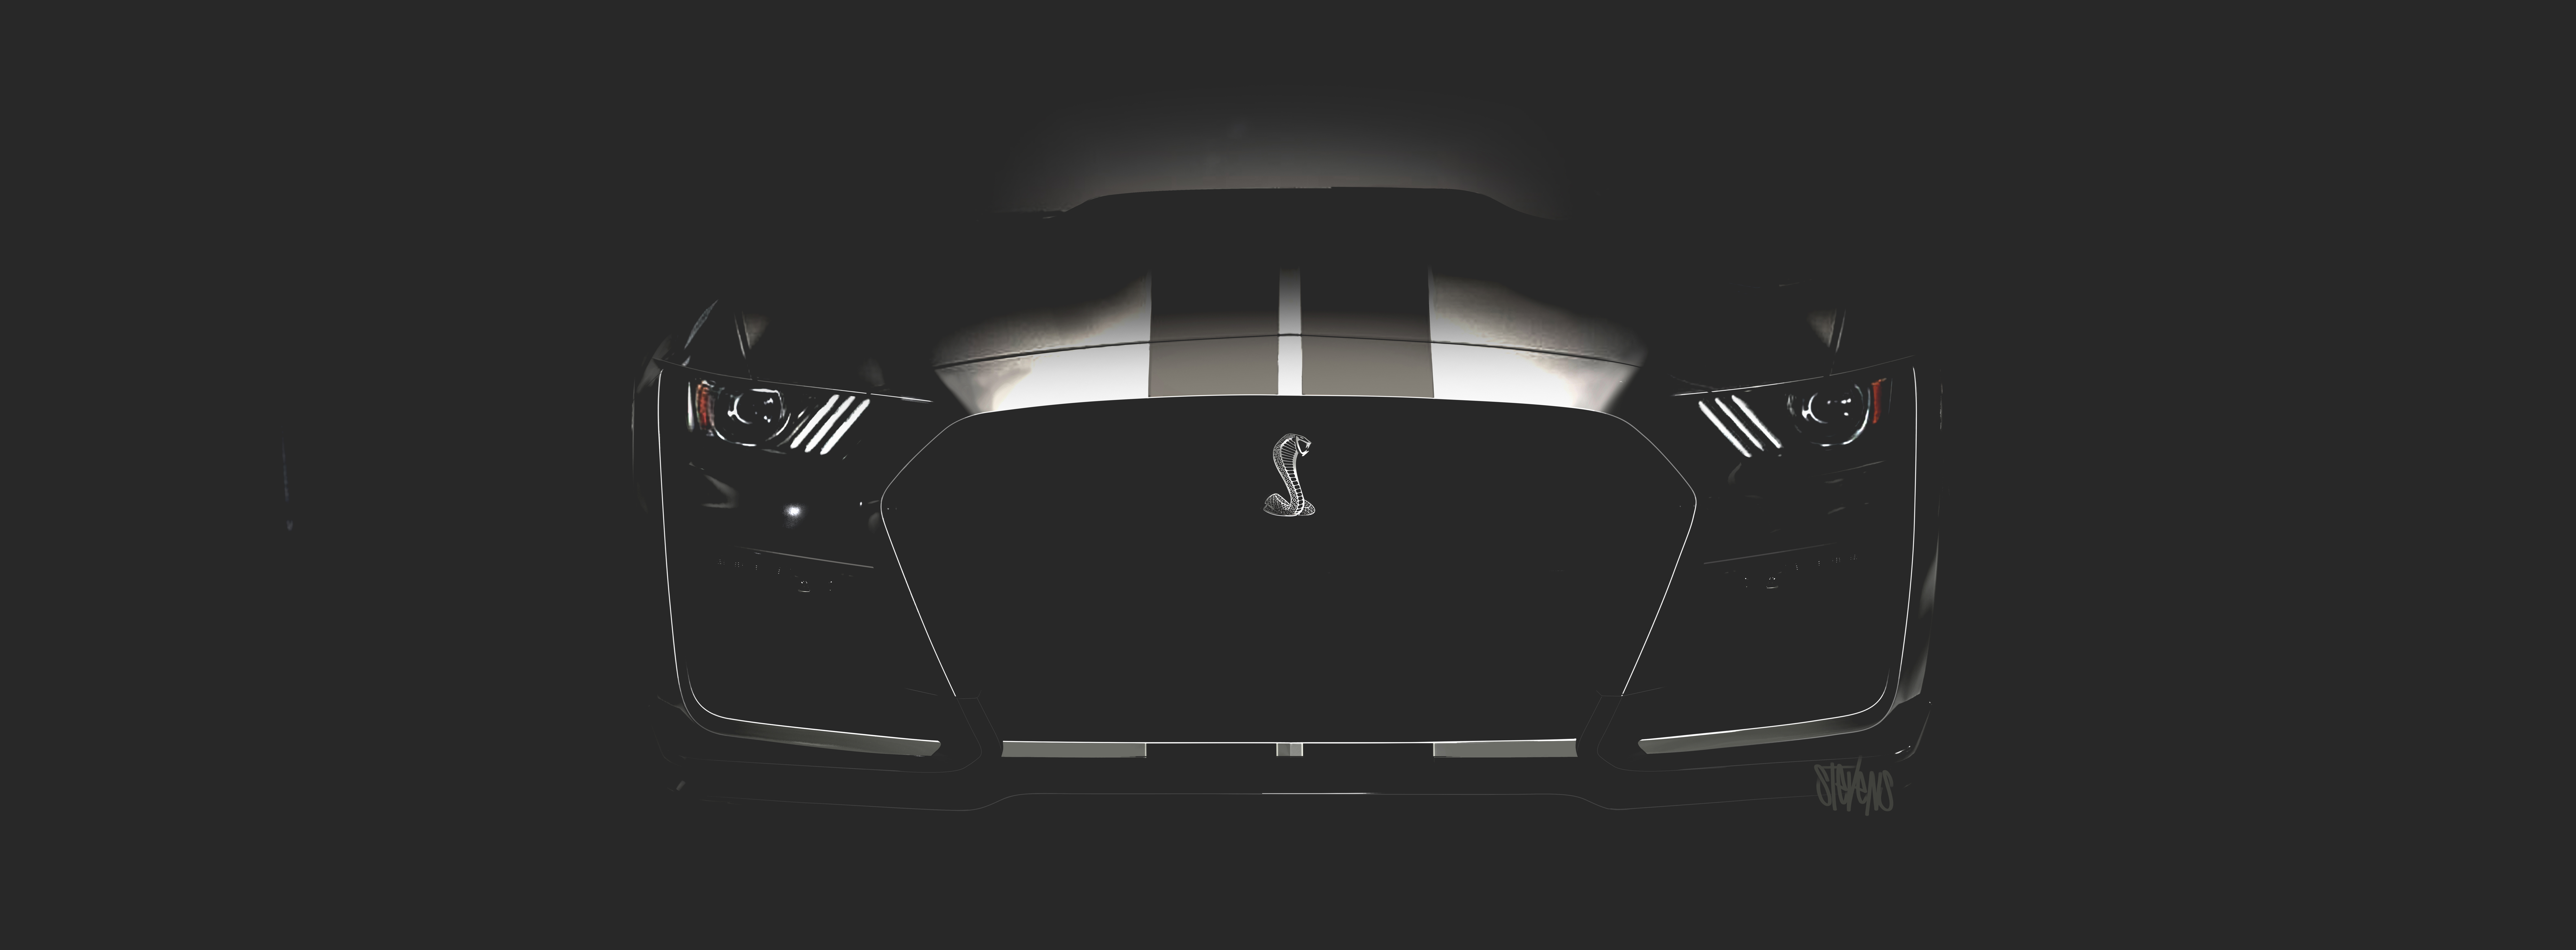 Ford Bronco, Mustang Shelby GT500 and small SUV teased; new 2019 Kuga and Explorer also confirmed Image #791969